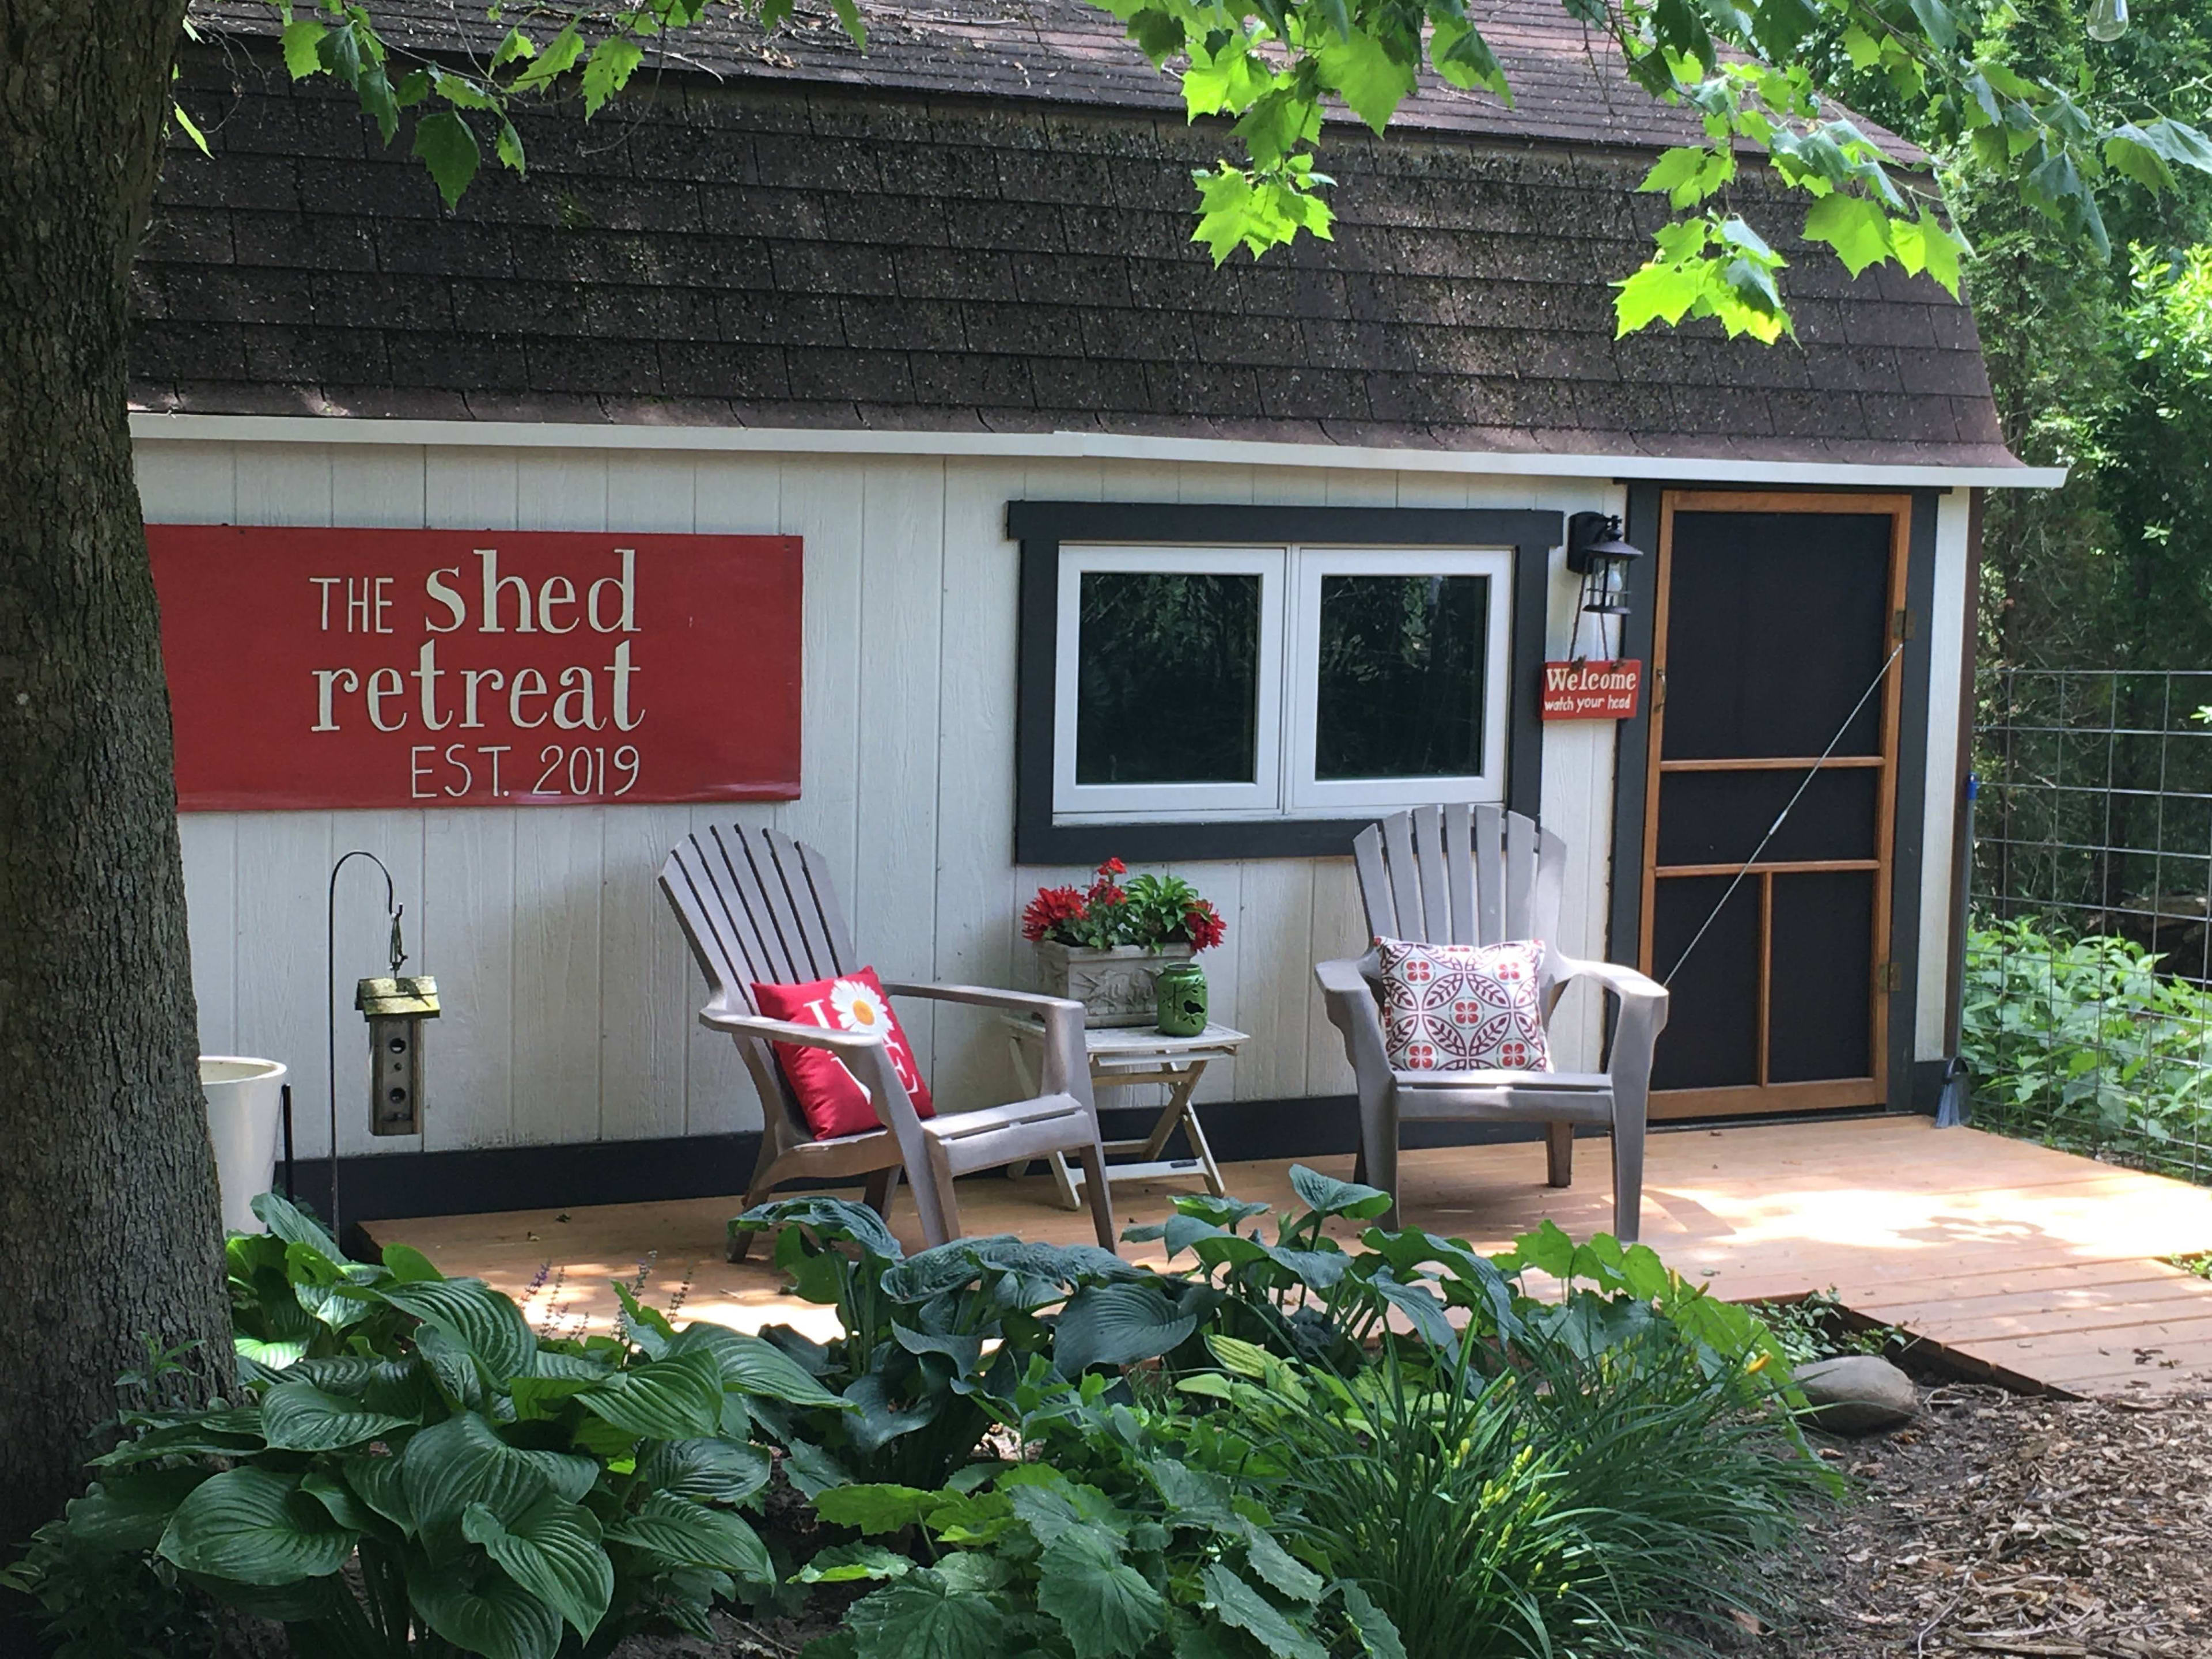 Shed your worries, fears, and busyness here ... and RELAX!